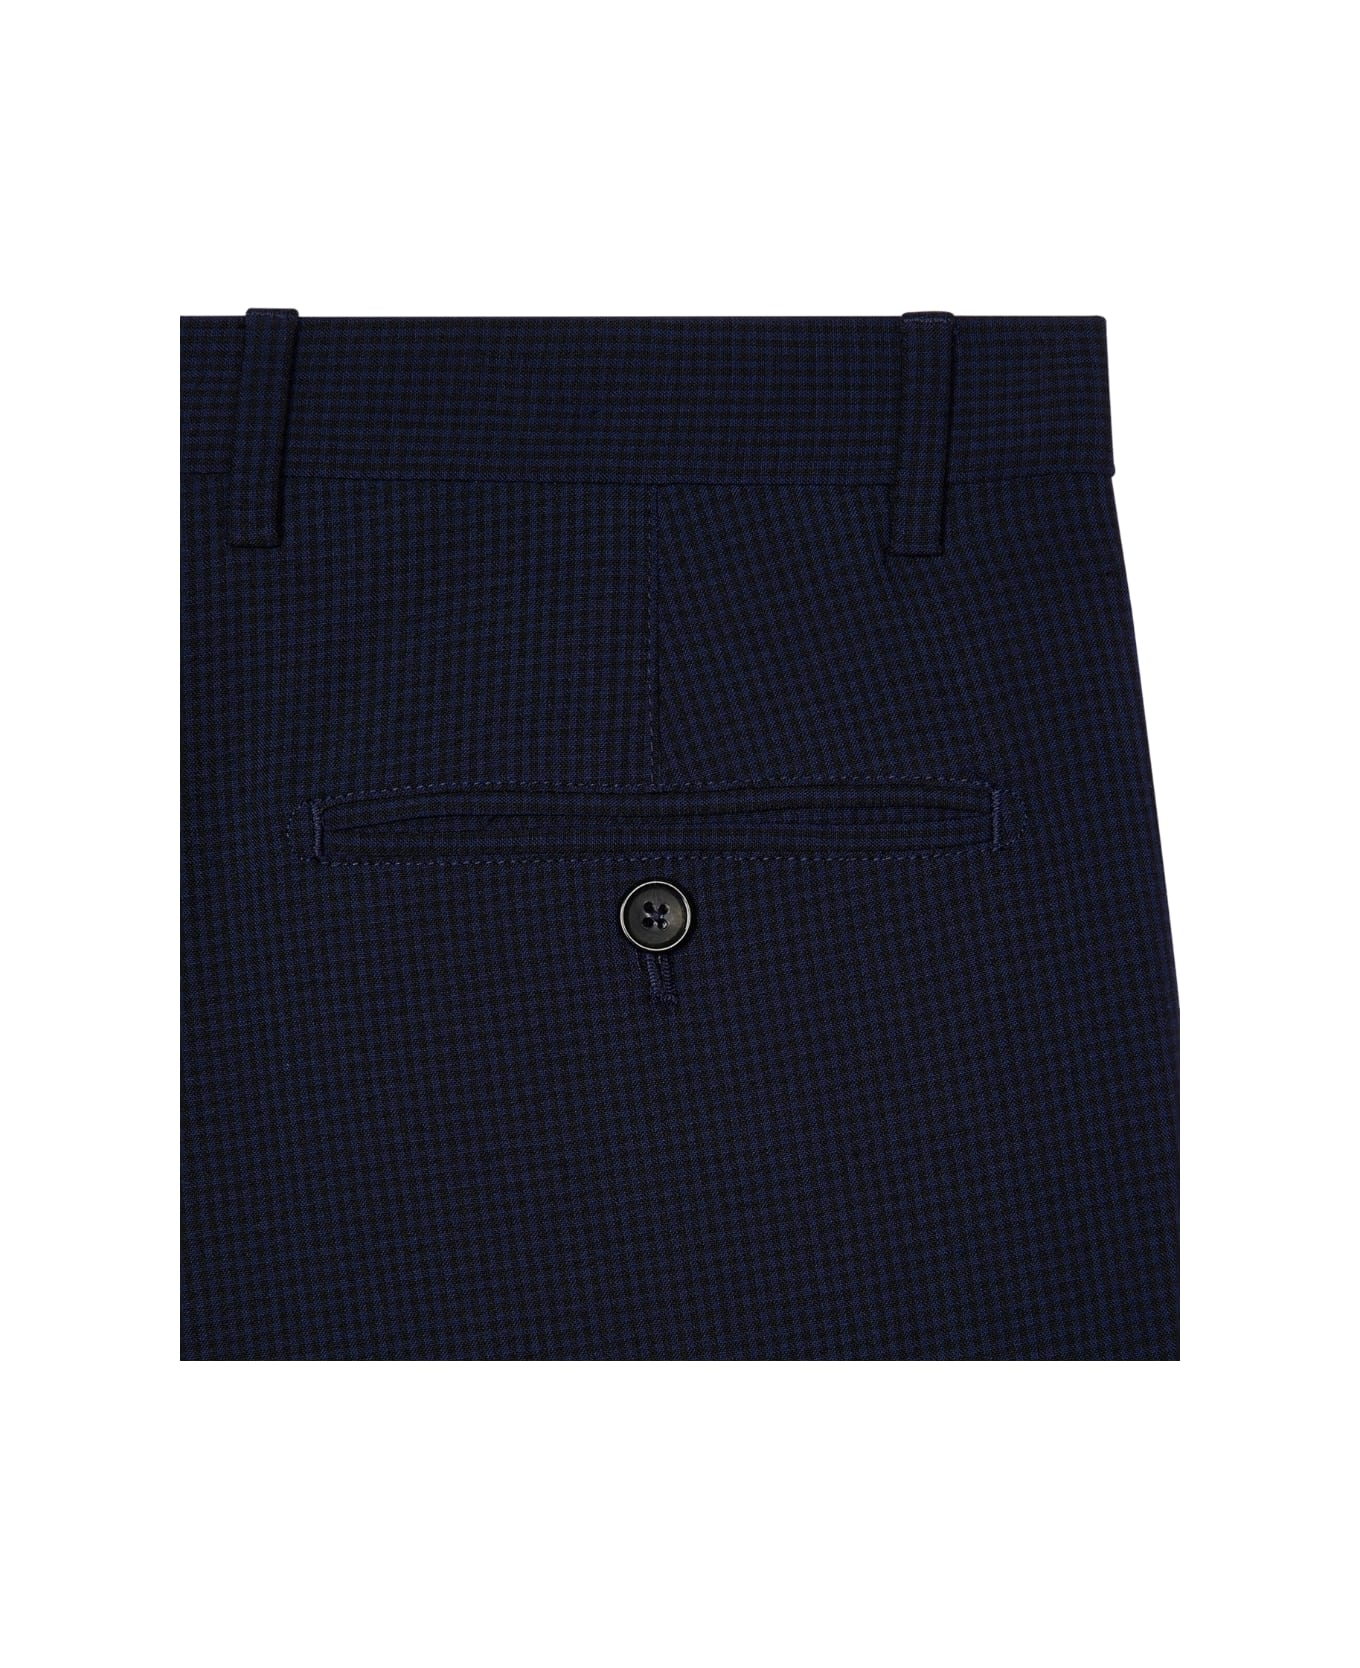 PS by Paul Smith Mens Trouser - Blues ボトムス